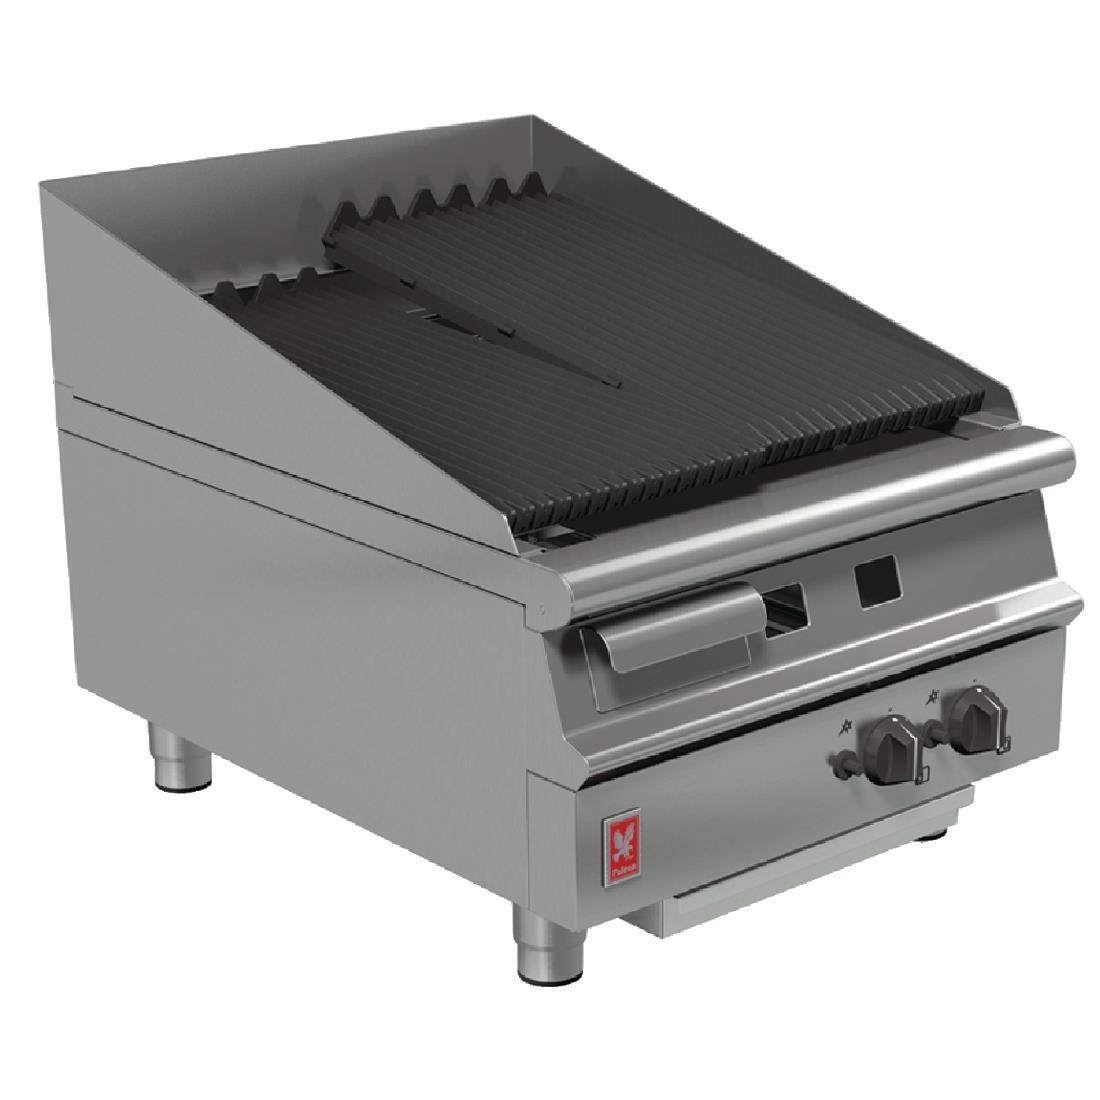 Falcon Dominator Plus LPG Chargrill Brewery G3625 - DK945-P  - 1